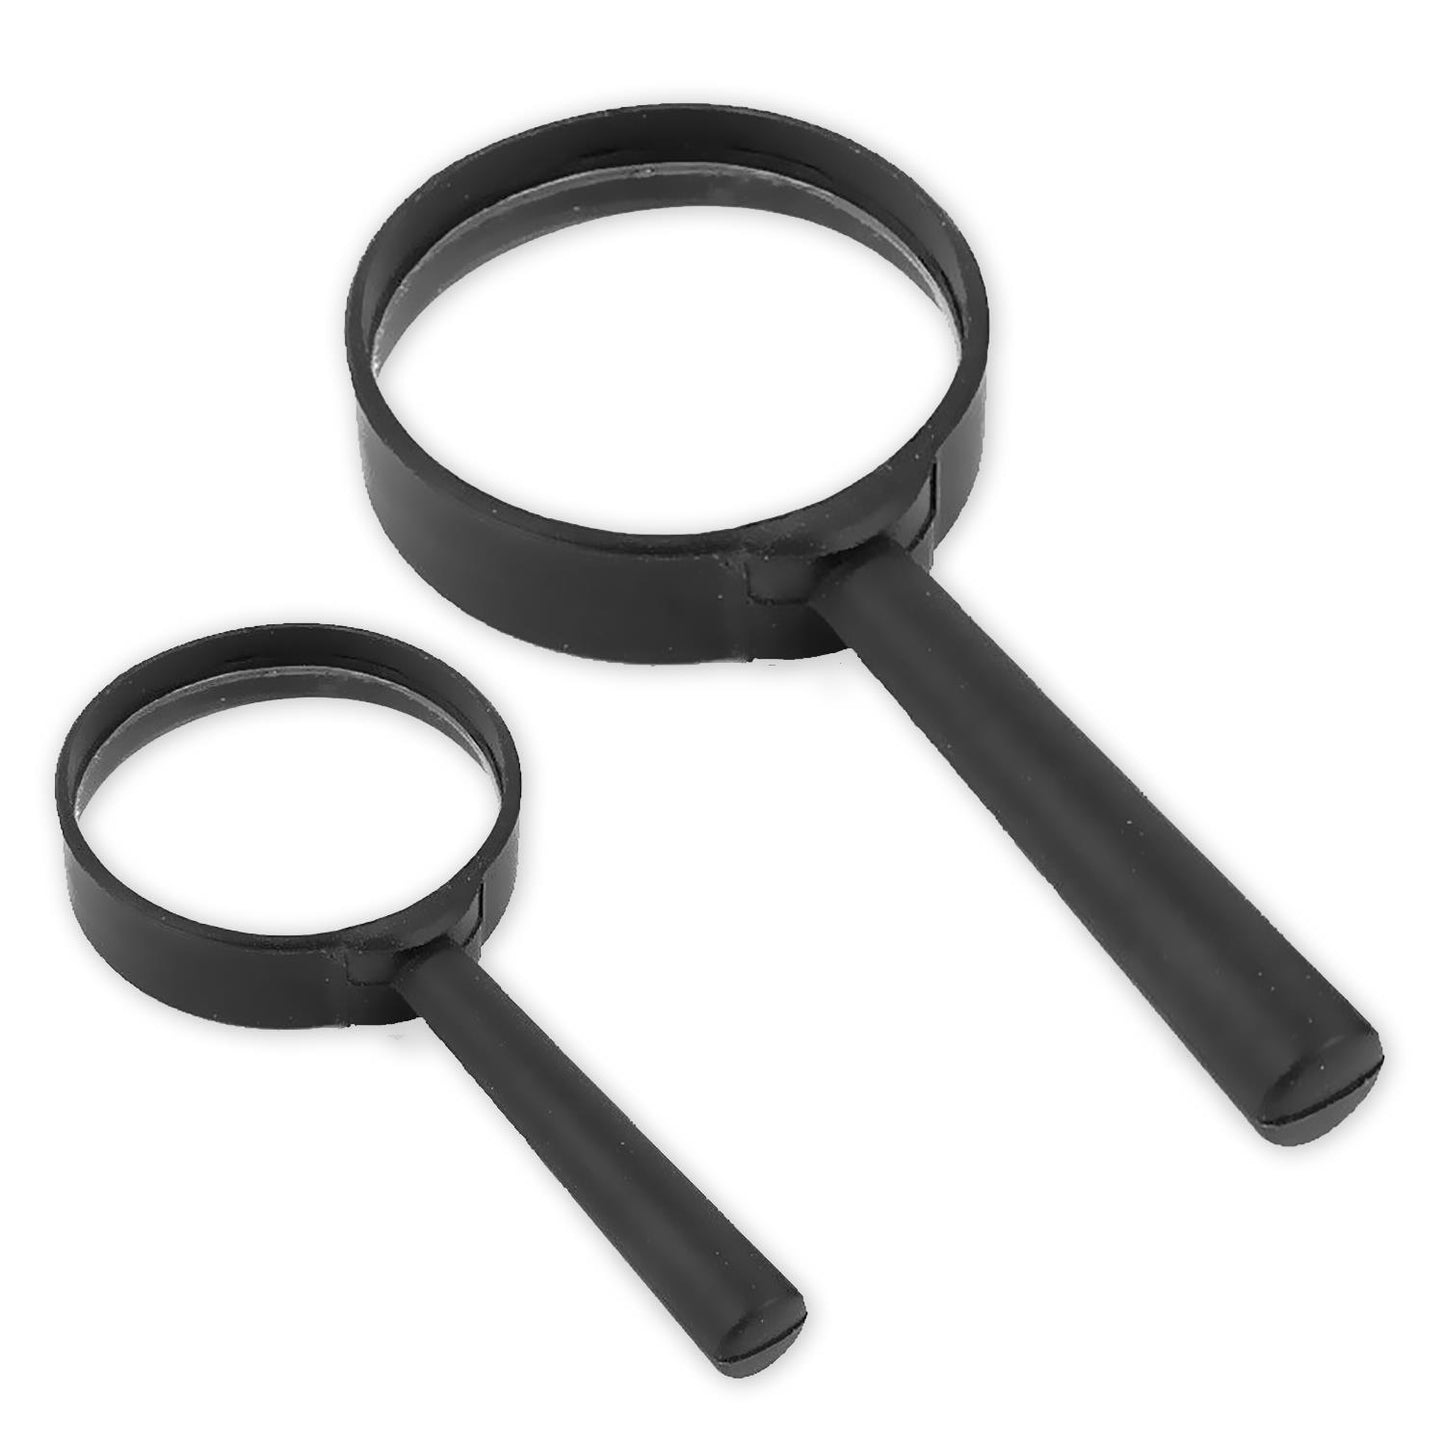 Clear And Precise Magnifying Glass Set (2-Pack)